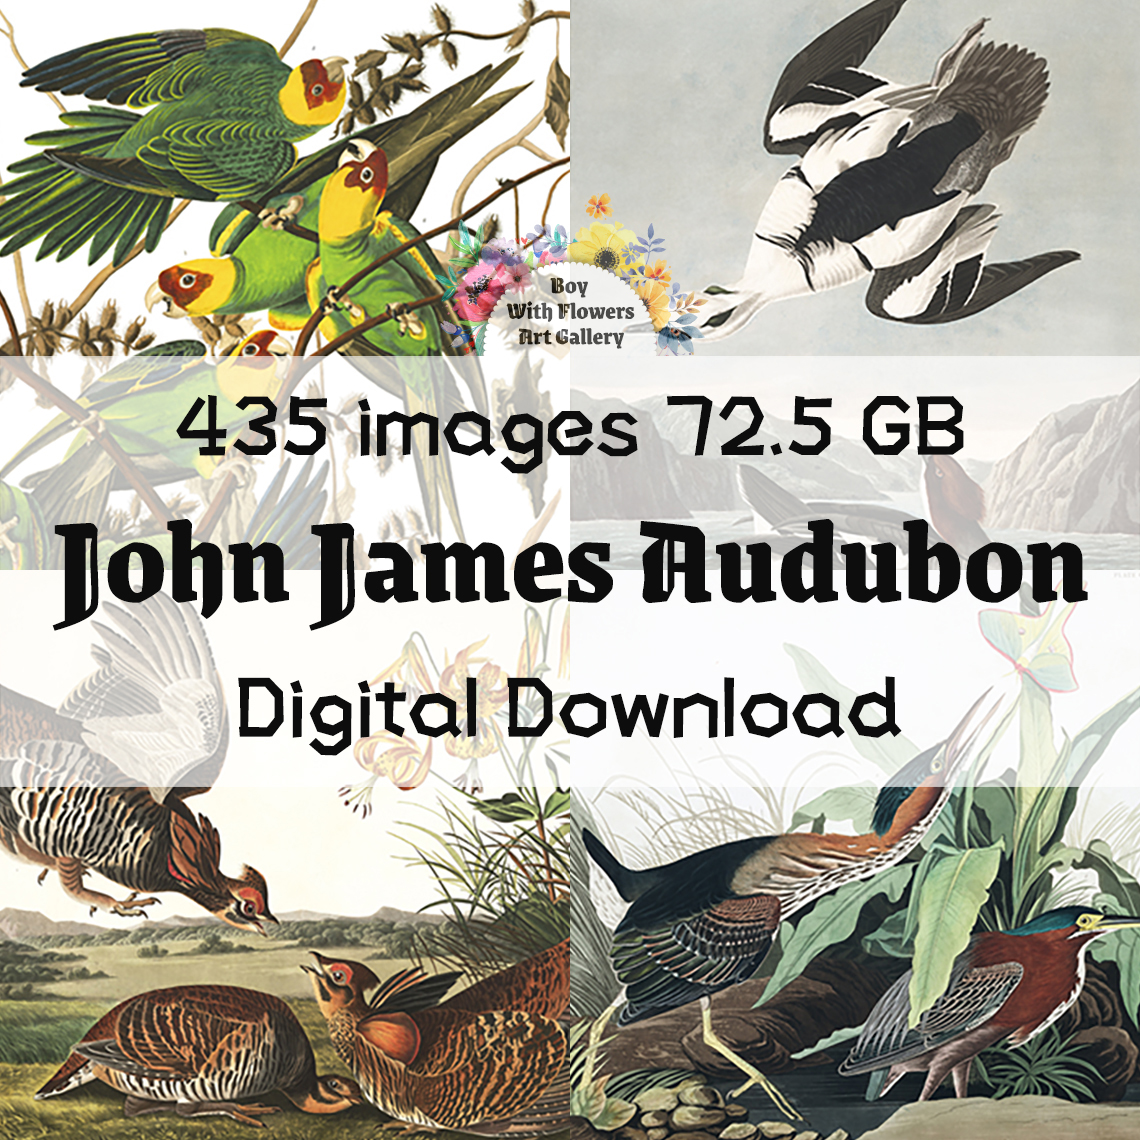 A collection of 435 high-resolution digital images of John James Audubon
▶️boywithflower.gumroad.com/l/vgeed
▶️boywithflowers.com/product/john-j…
▶️patreon.com/posts/64460044

Get more digital paintings.
boywithflower.gumroad.com
boywithflowers.com
patreon.com/boy_with_flowe…

#johnjamesaudubon #art